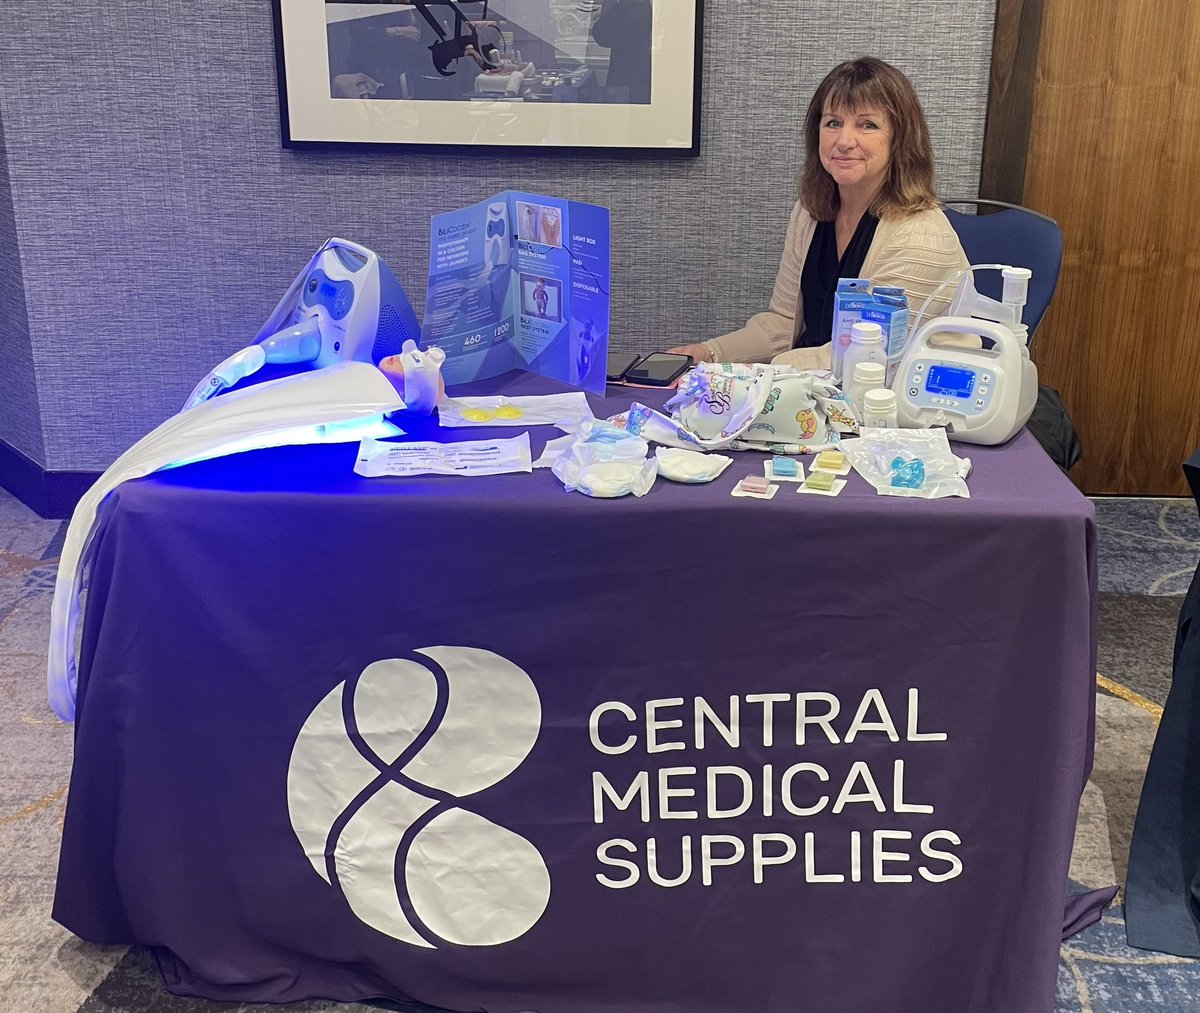 Thank You to all of today's sponsors who have come to support us at the @KssOdn Education Day @WaltersMedical @ChiesiGroup @centralmedicals #ThankYou #TheNeonatalJourneyKSS @Neonatal_ed